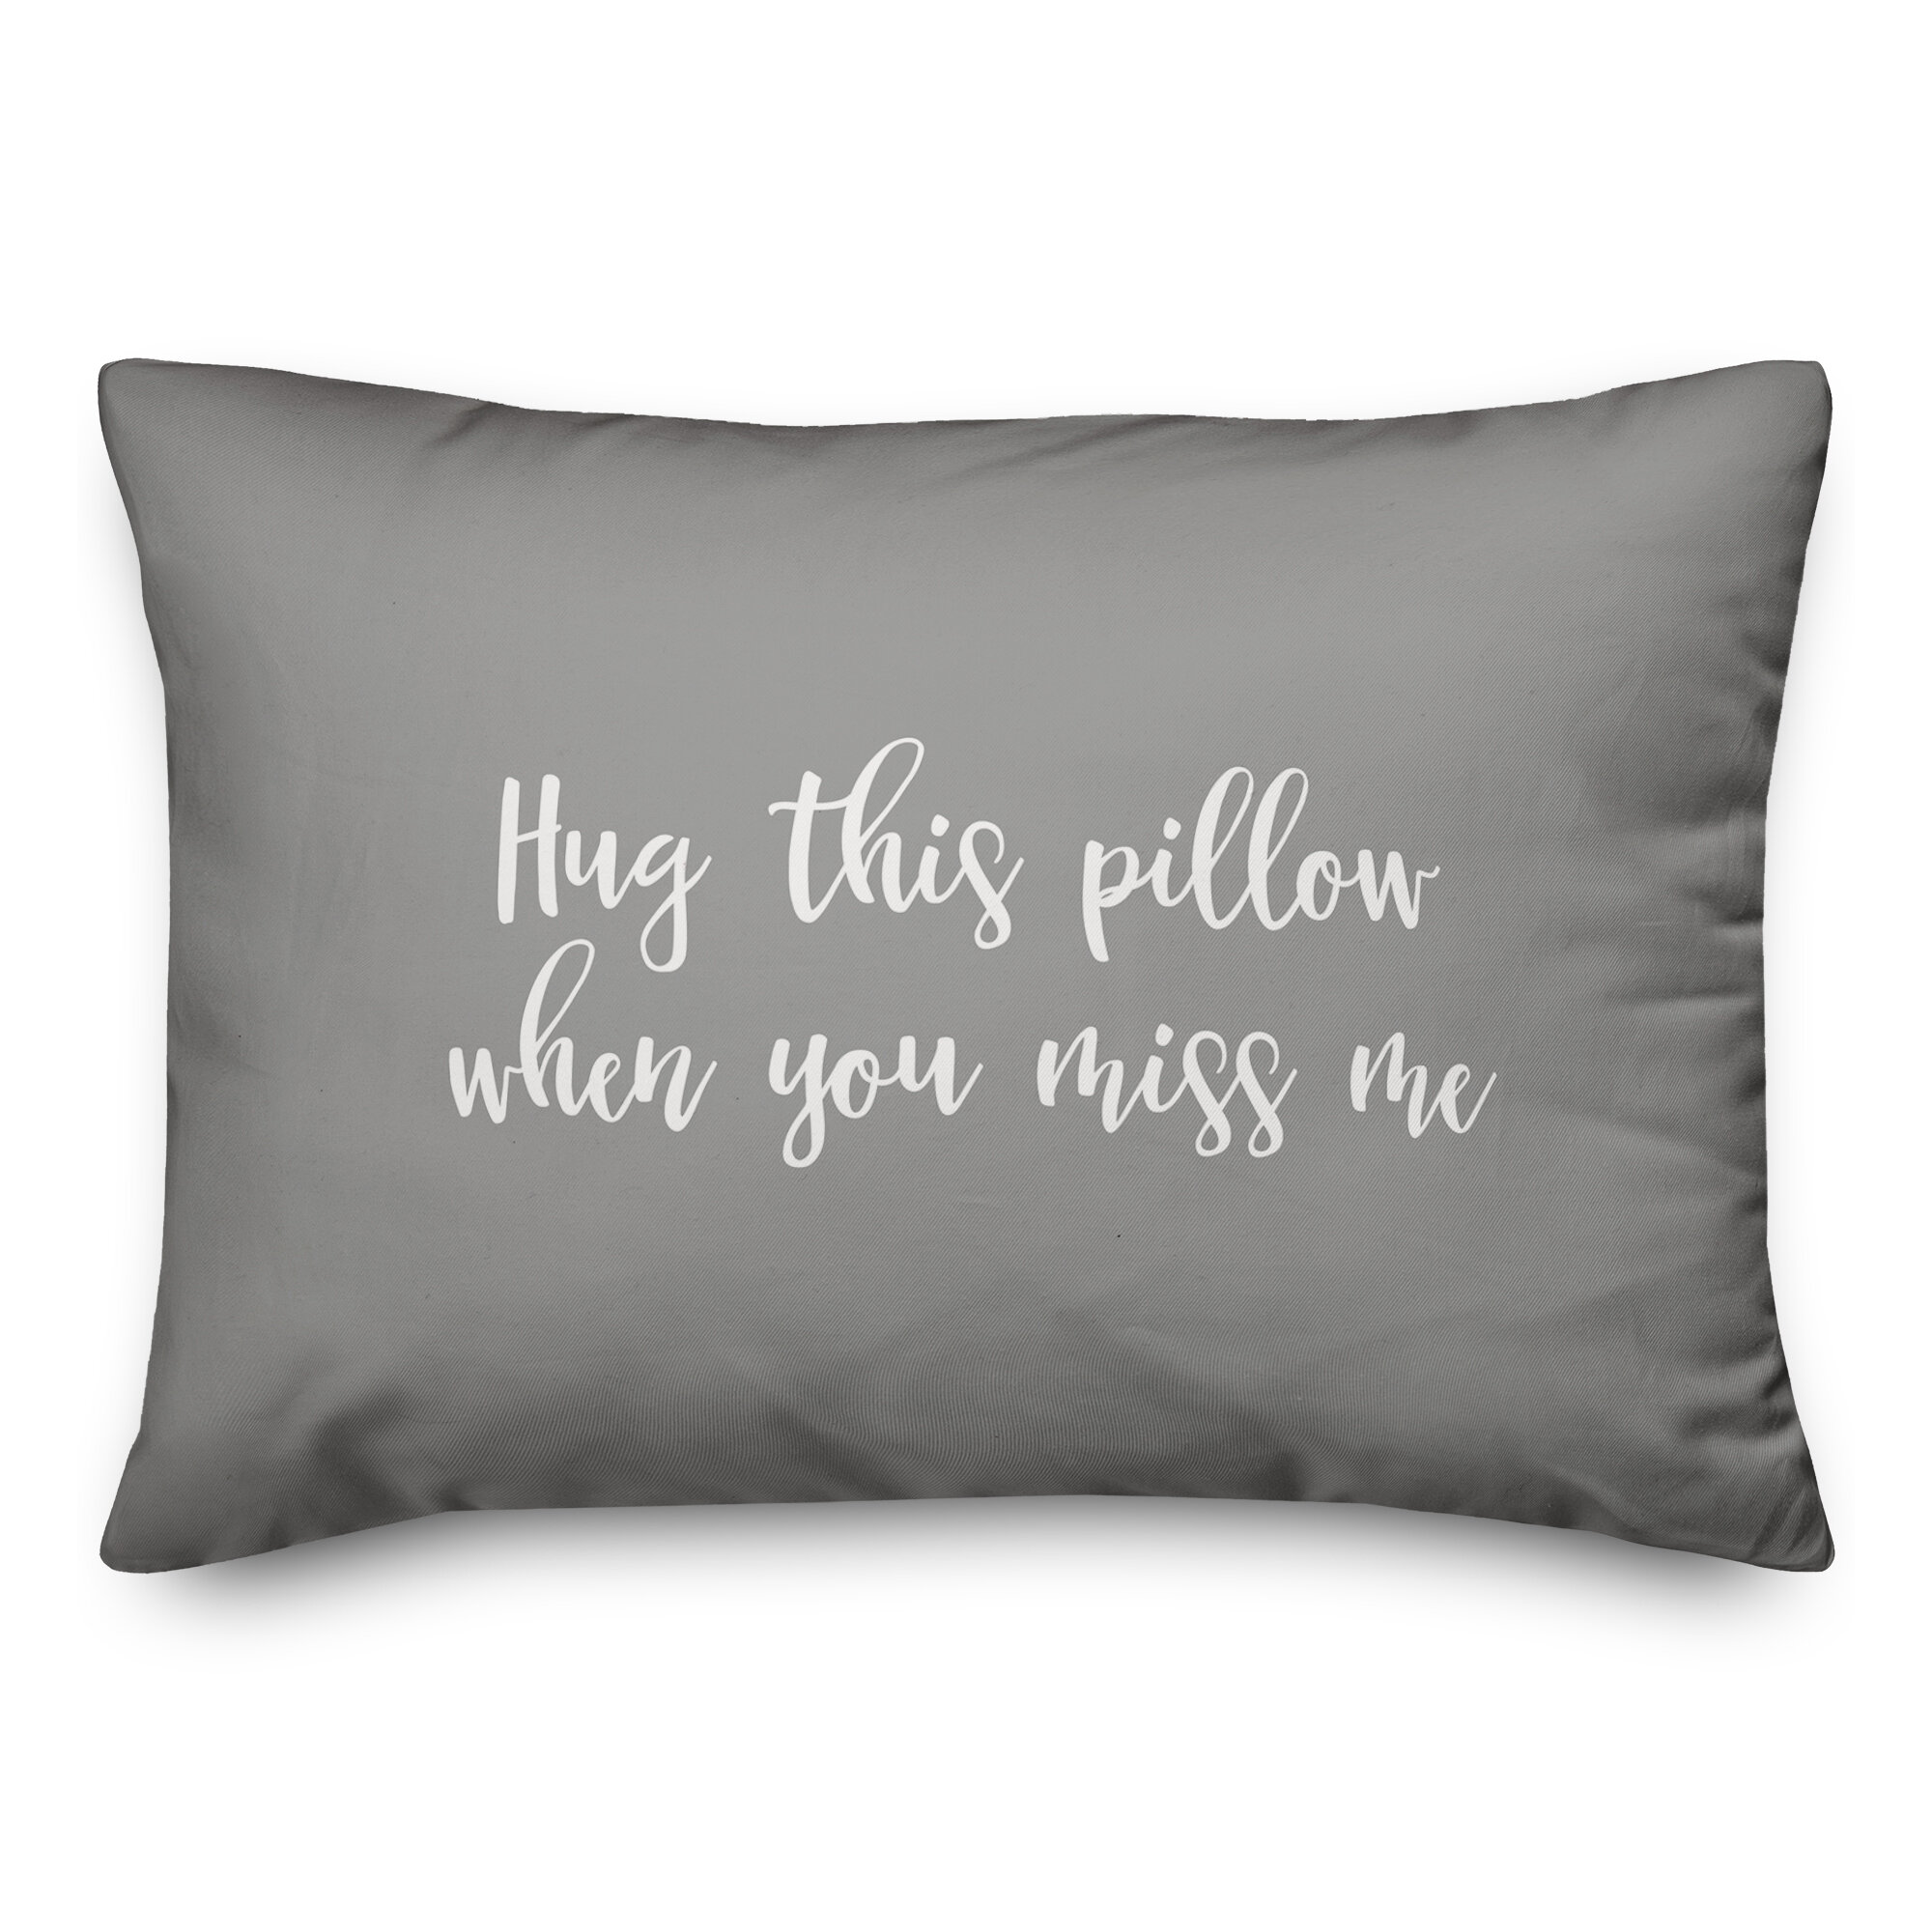 Ebern Designs The Lyell Collection Hug This Pillow When You Miss